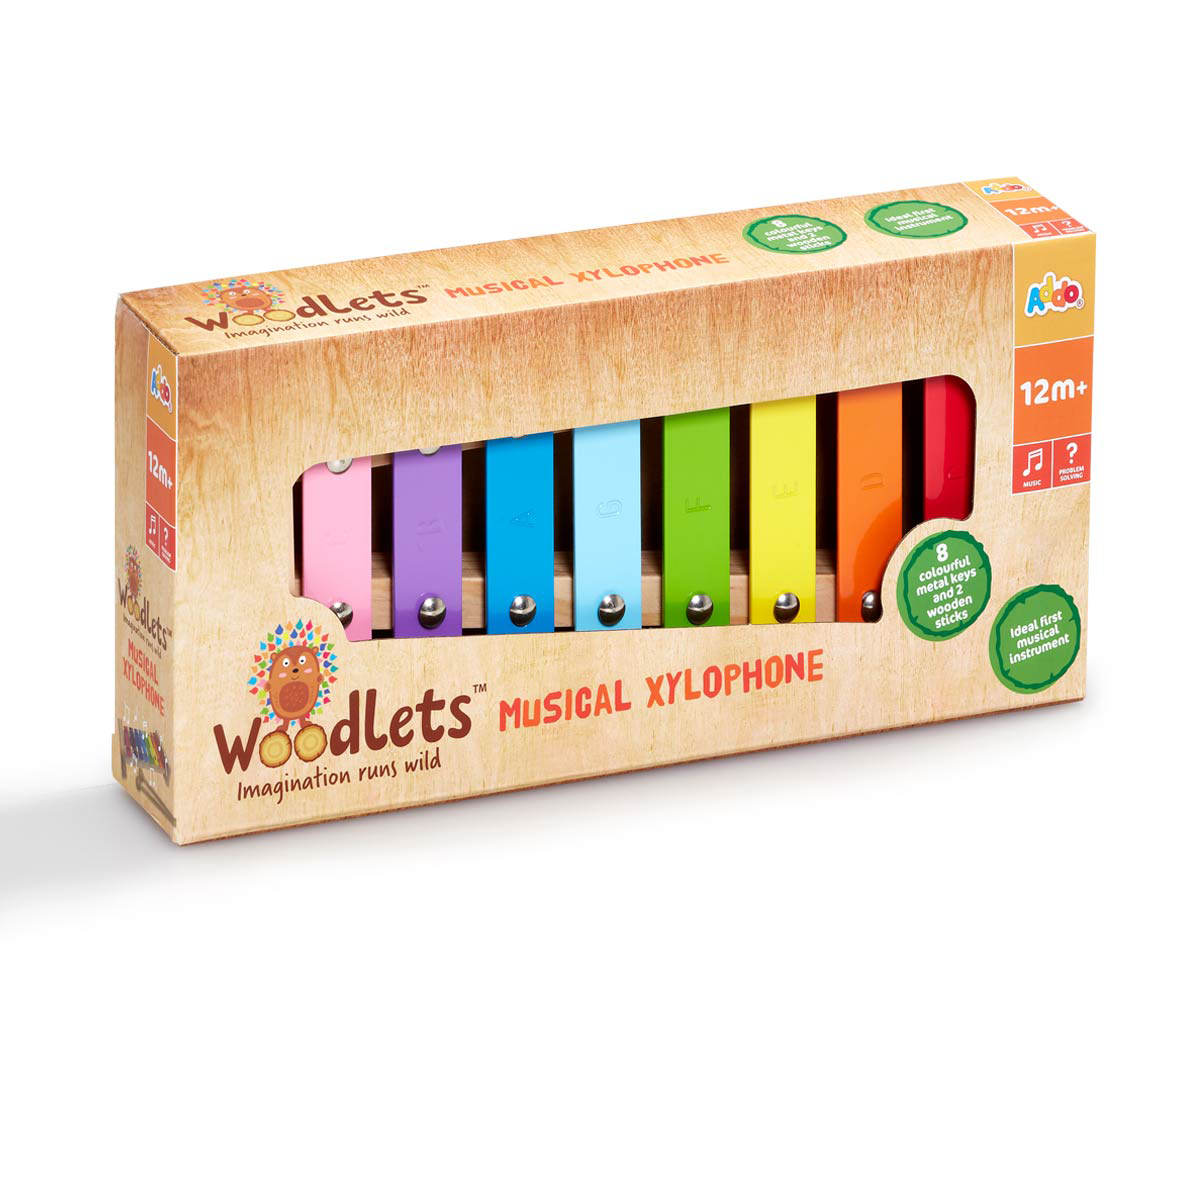 Woodlets Musical Xylophone